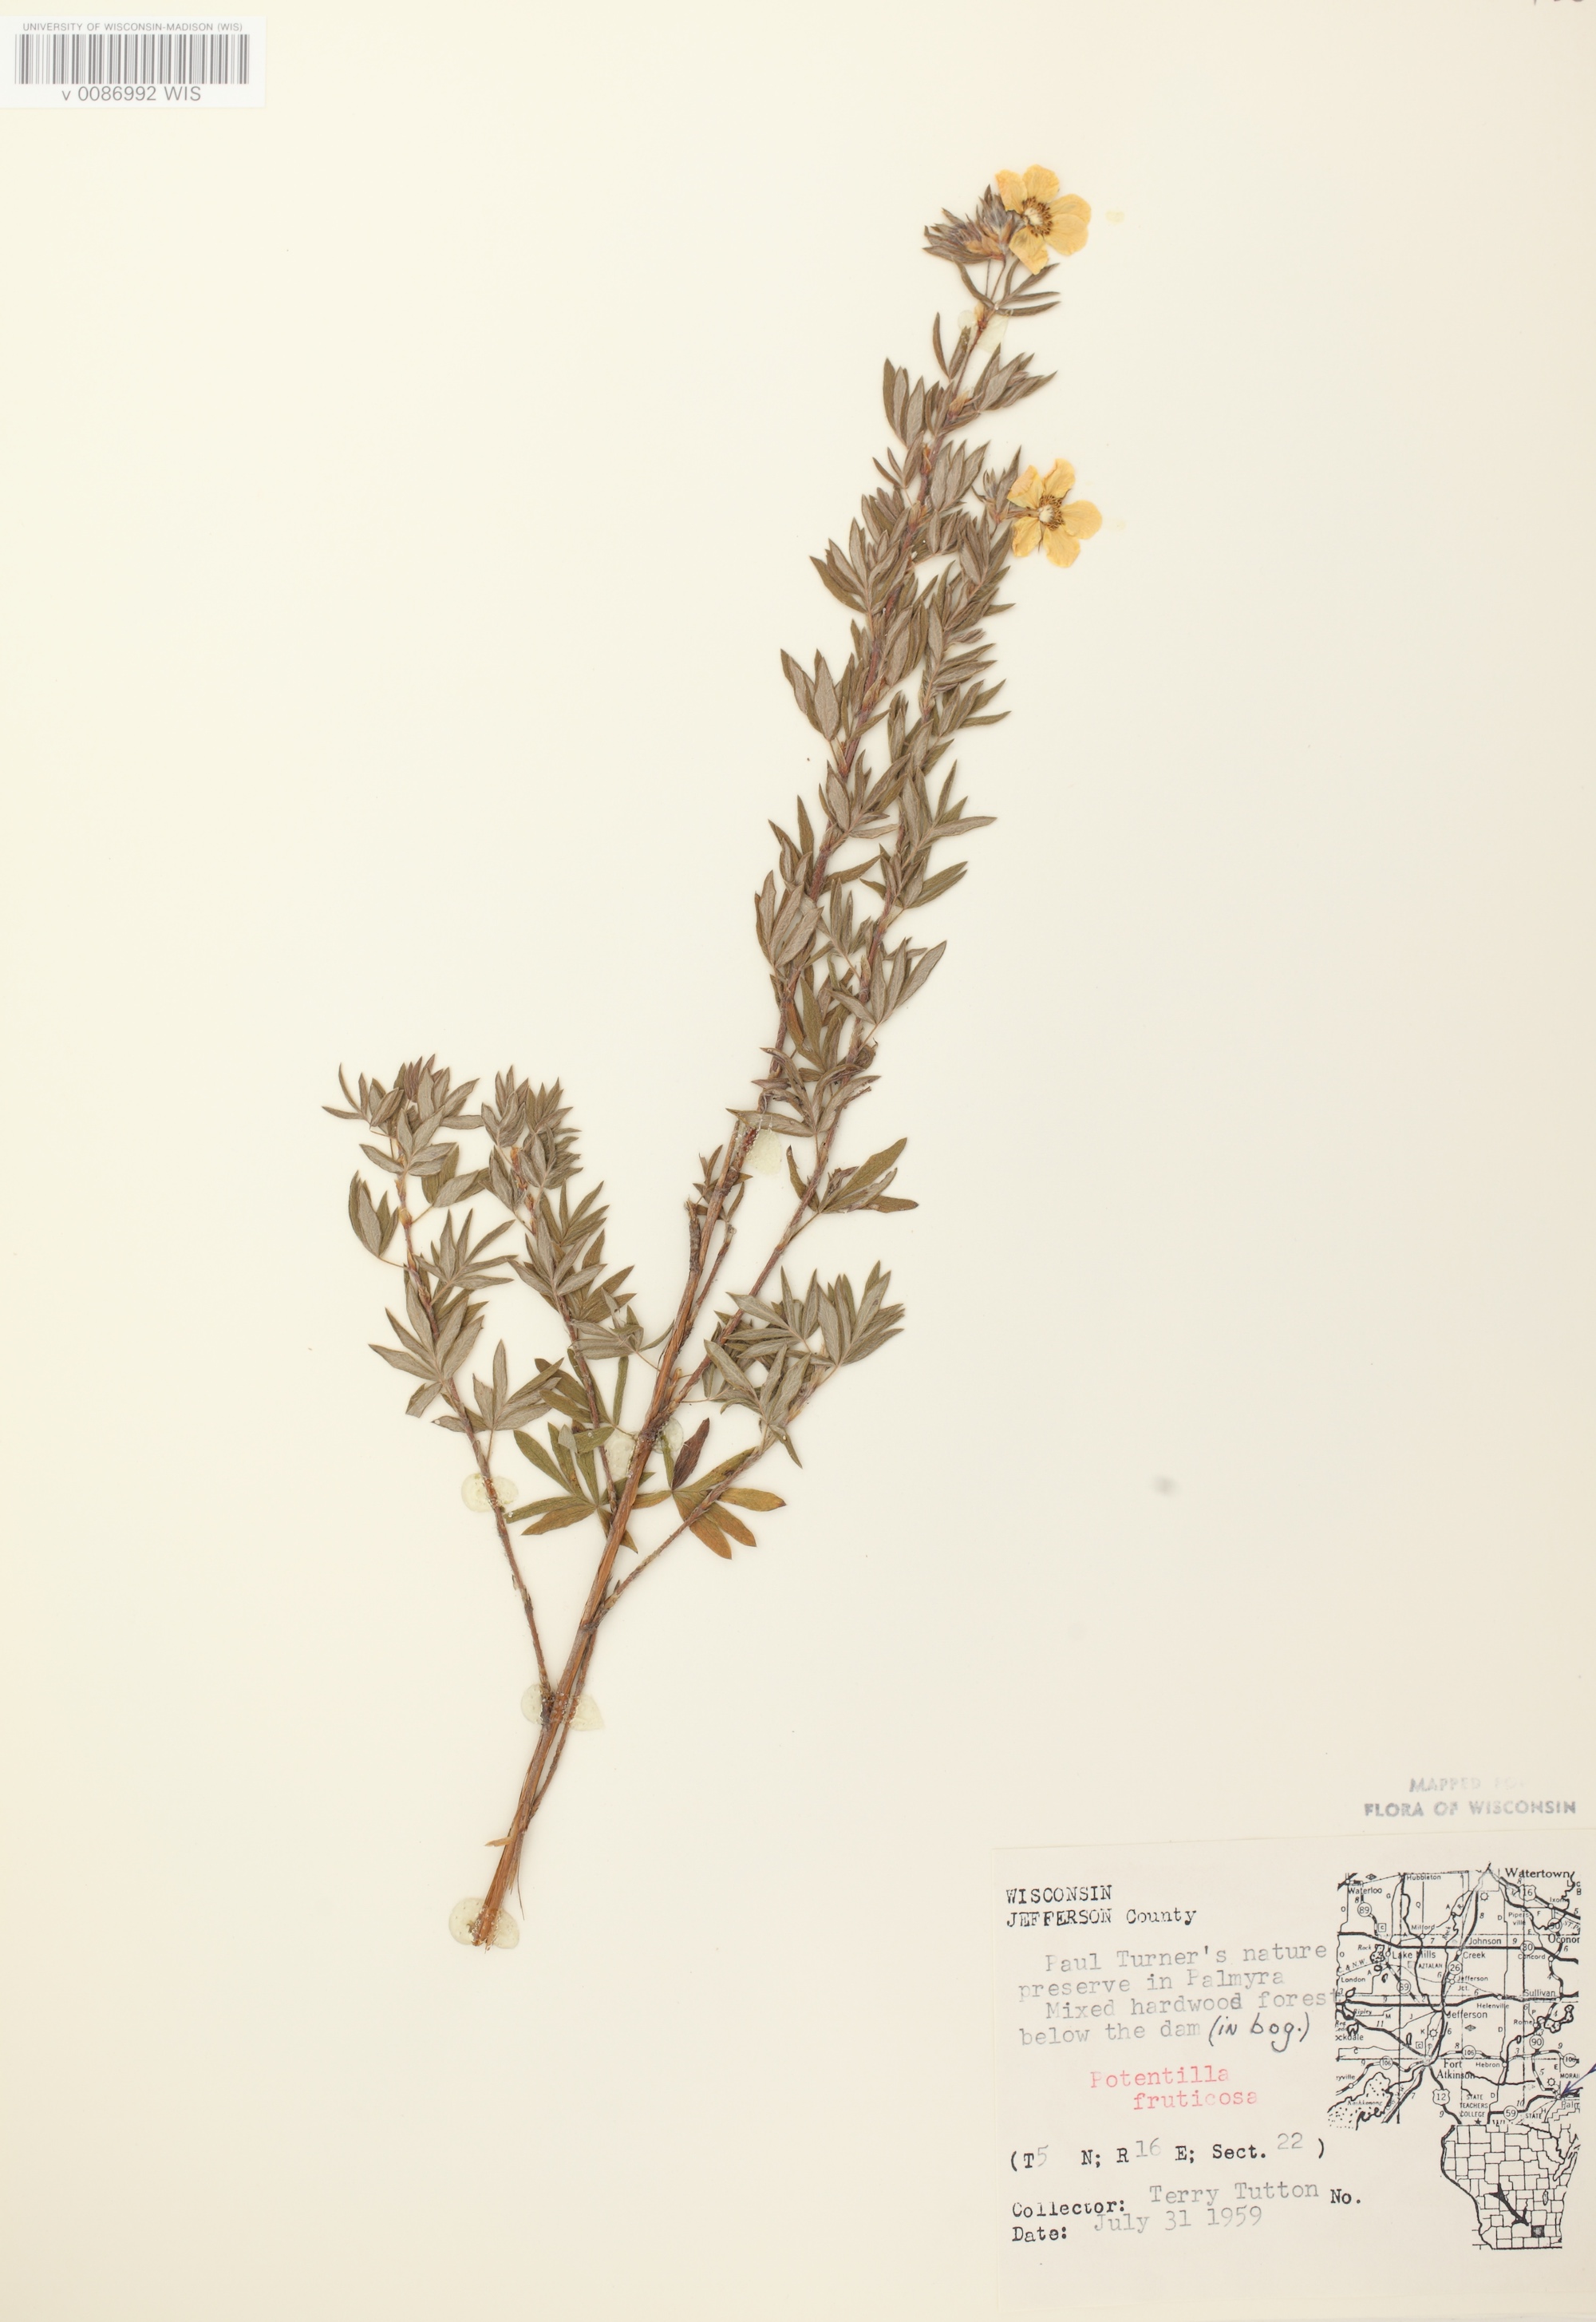 Shrubby Cinquefoil specimen collected in Jefferson County on July 31, 1959.